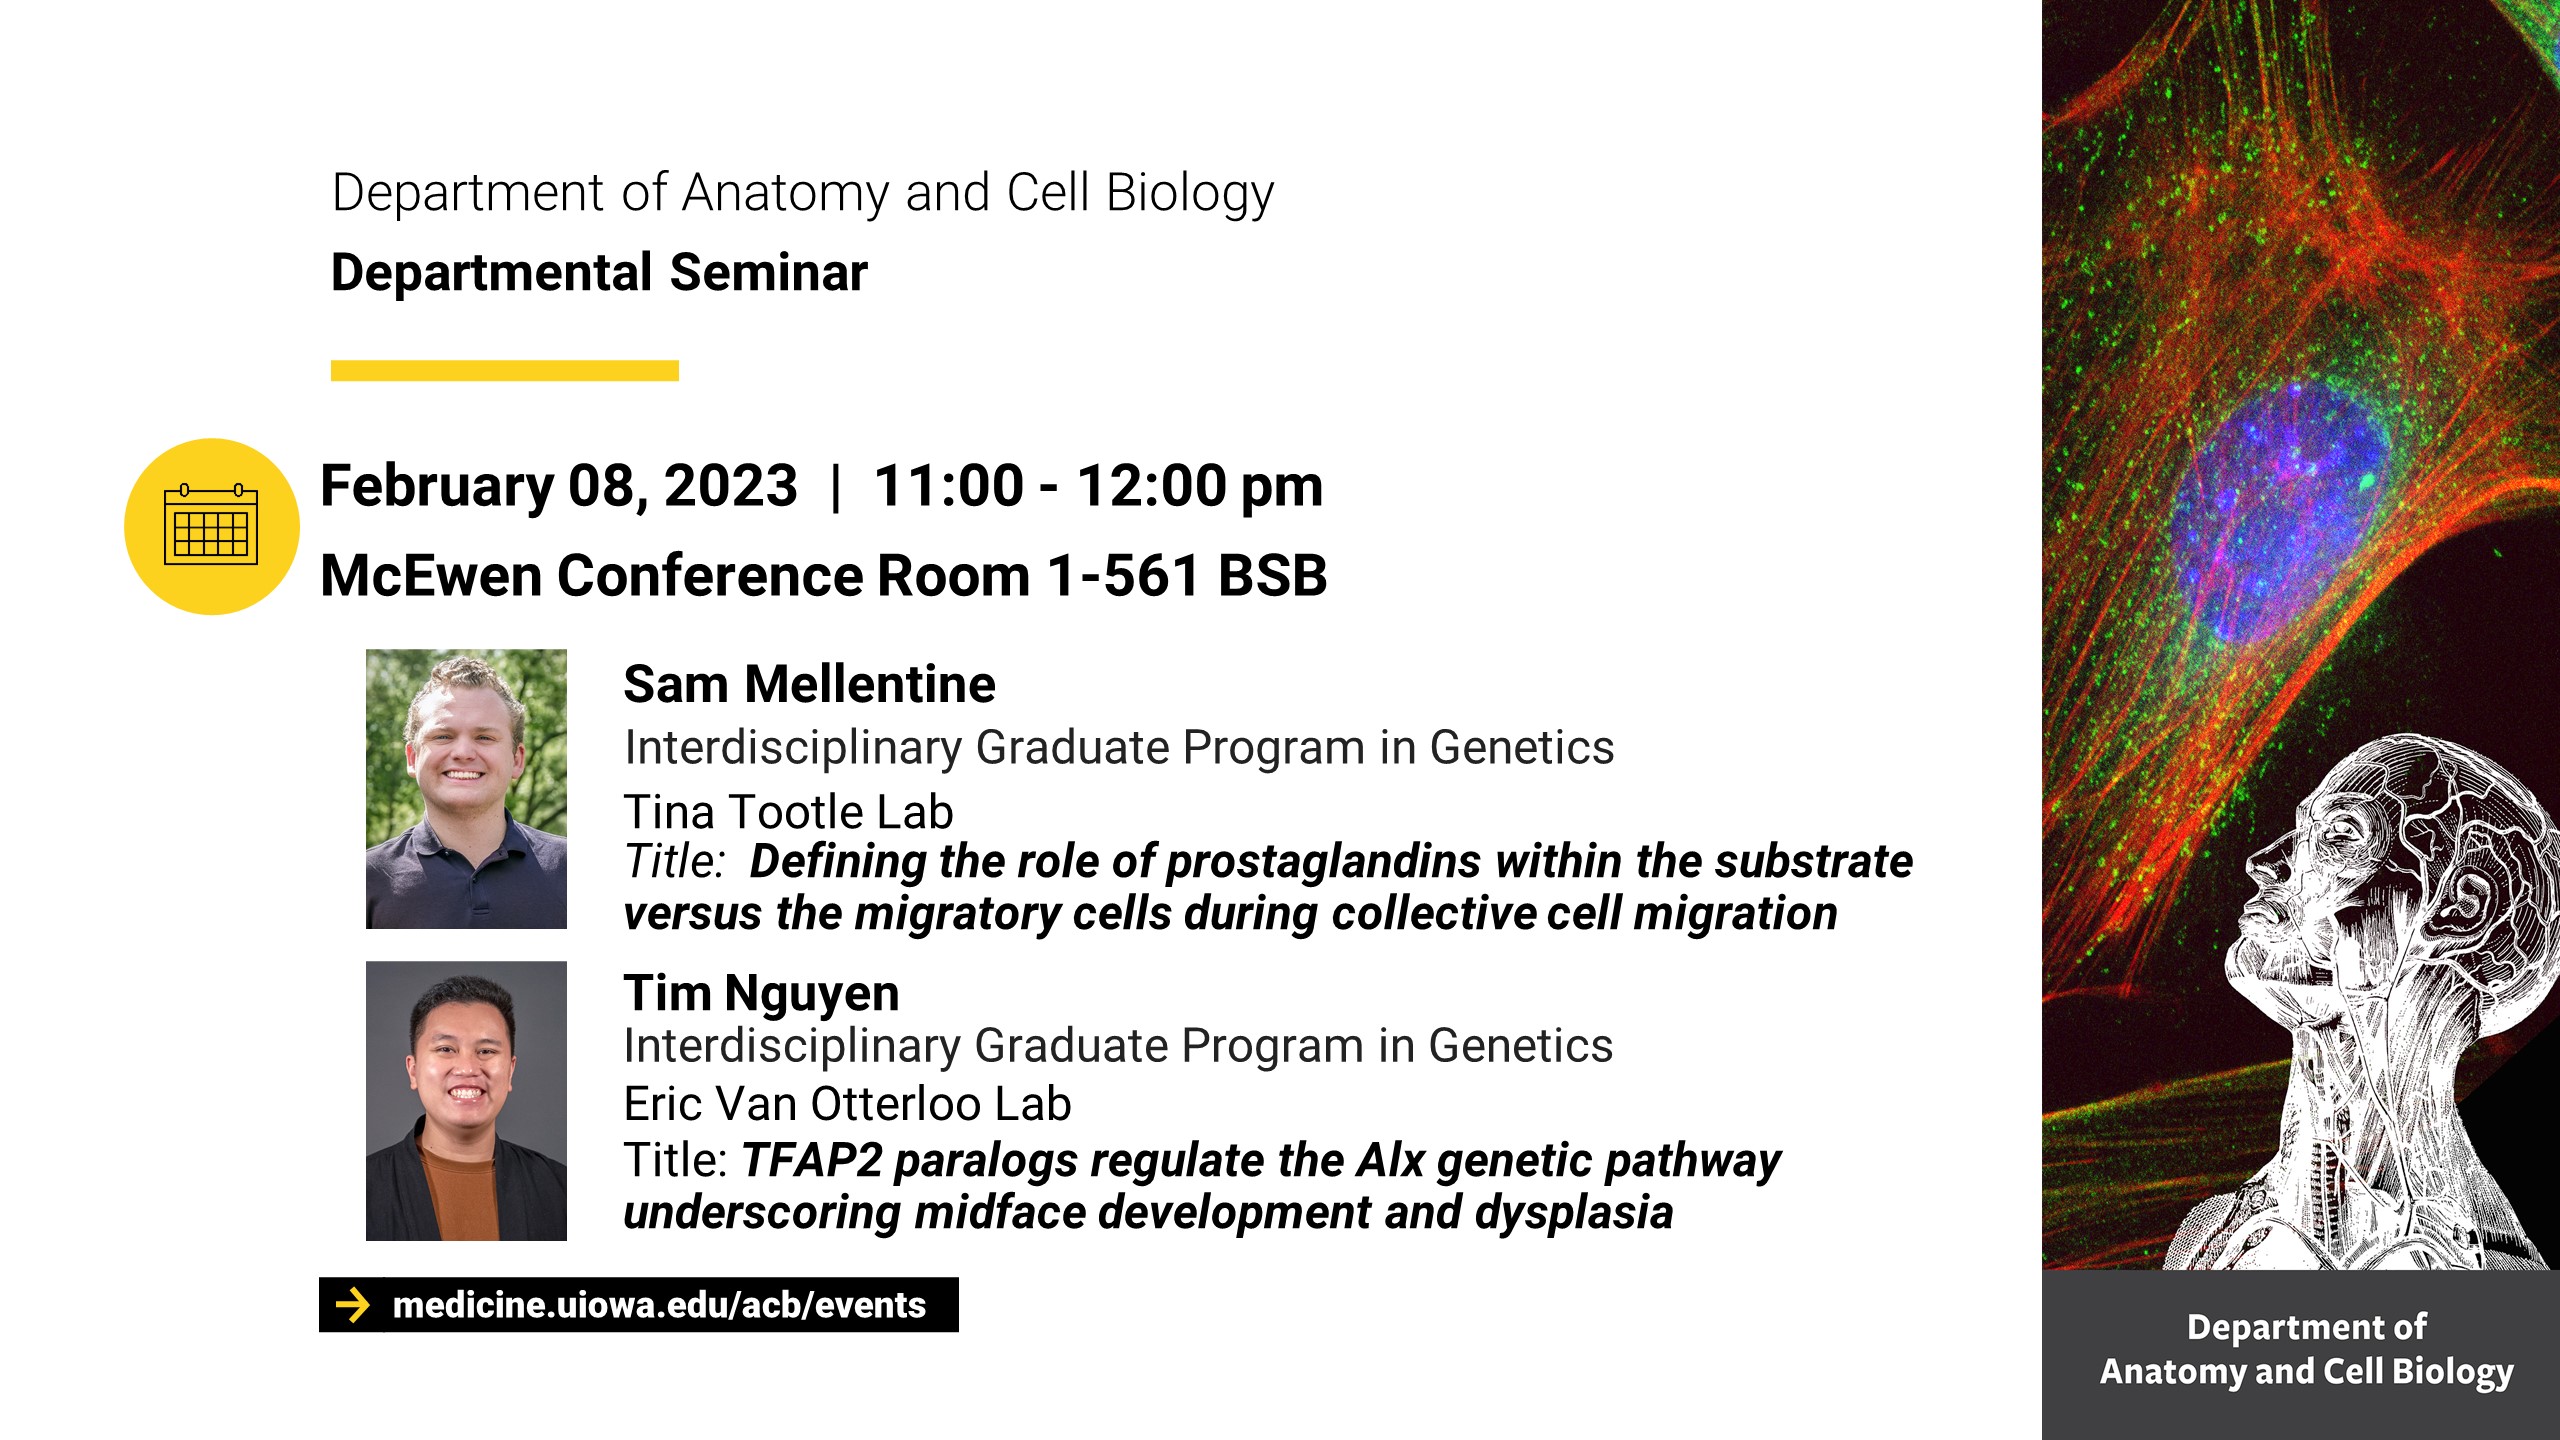 Anatomy & Cell Biology Wednesday Seminar Series promotional image